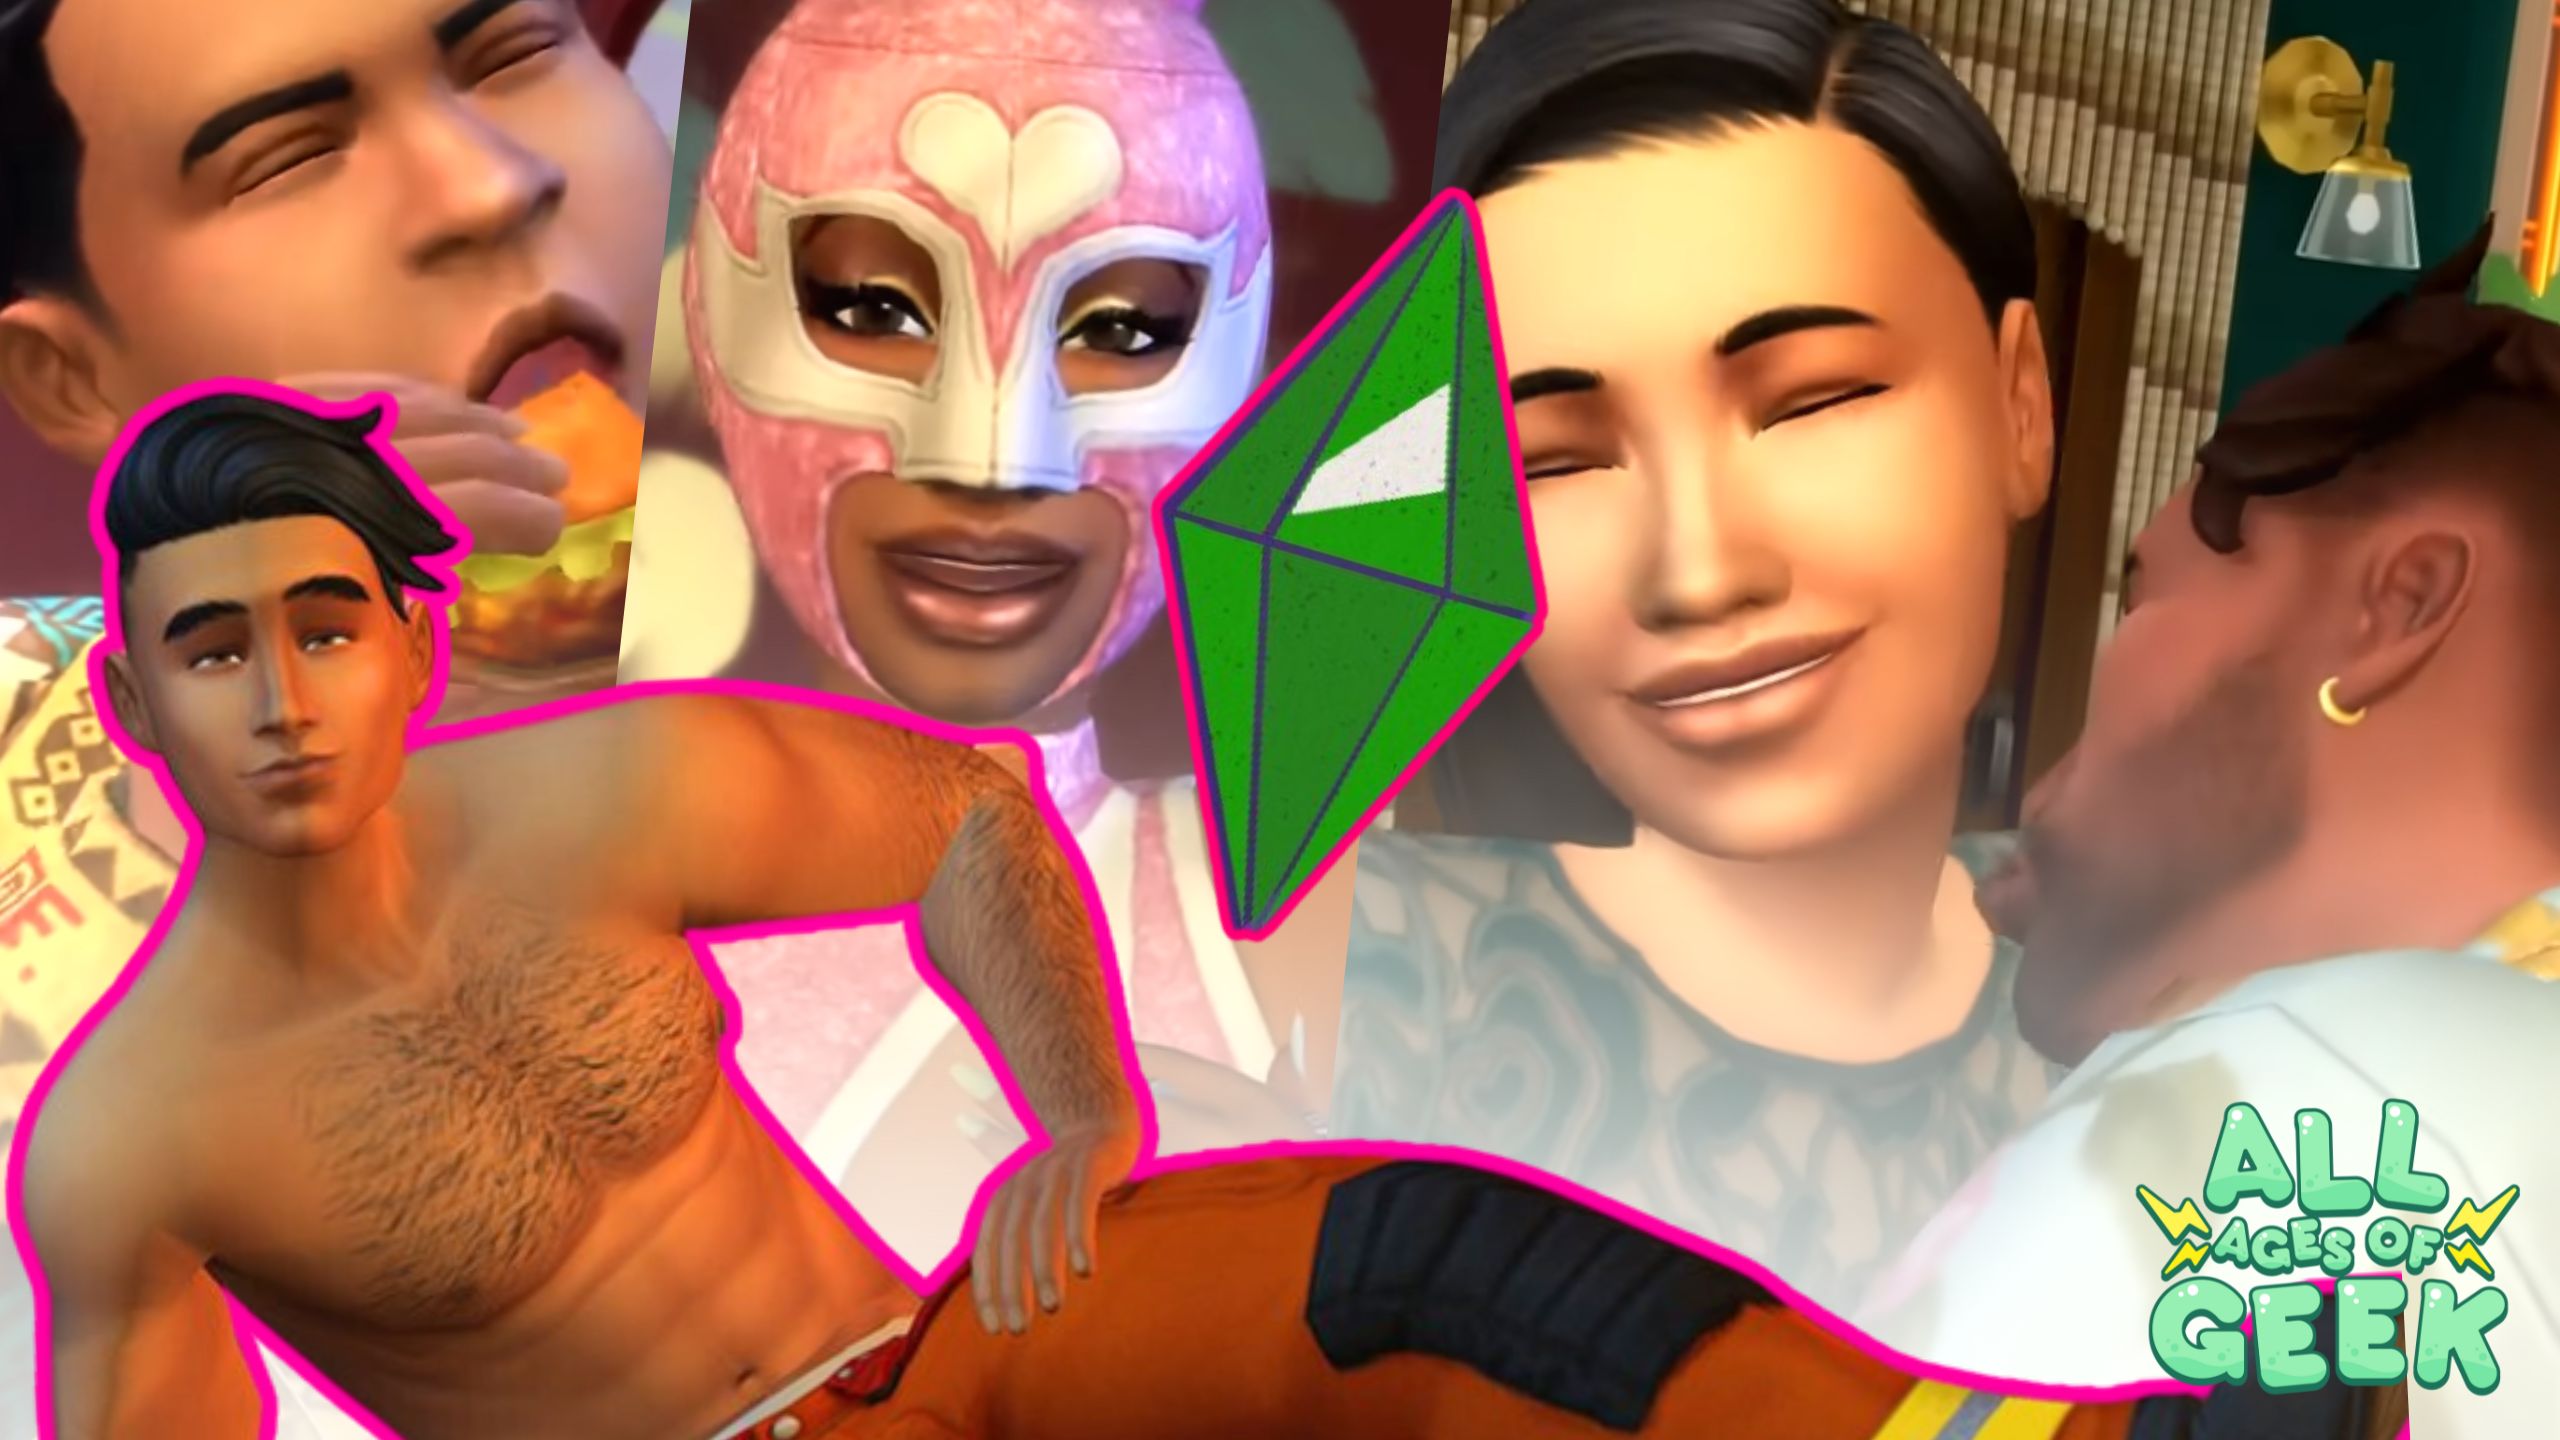 The Sims 4: Lovestruck – Finally, the Romantic Expansion Pack We’ve Been Waiting For!